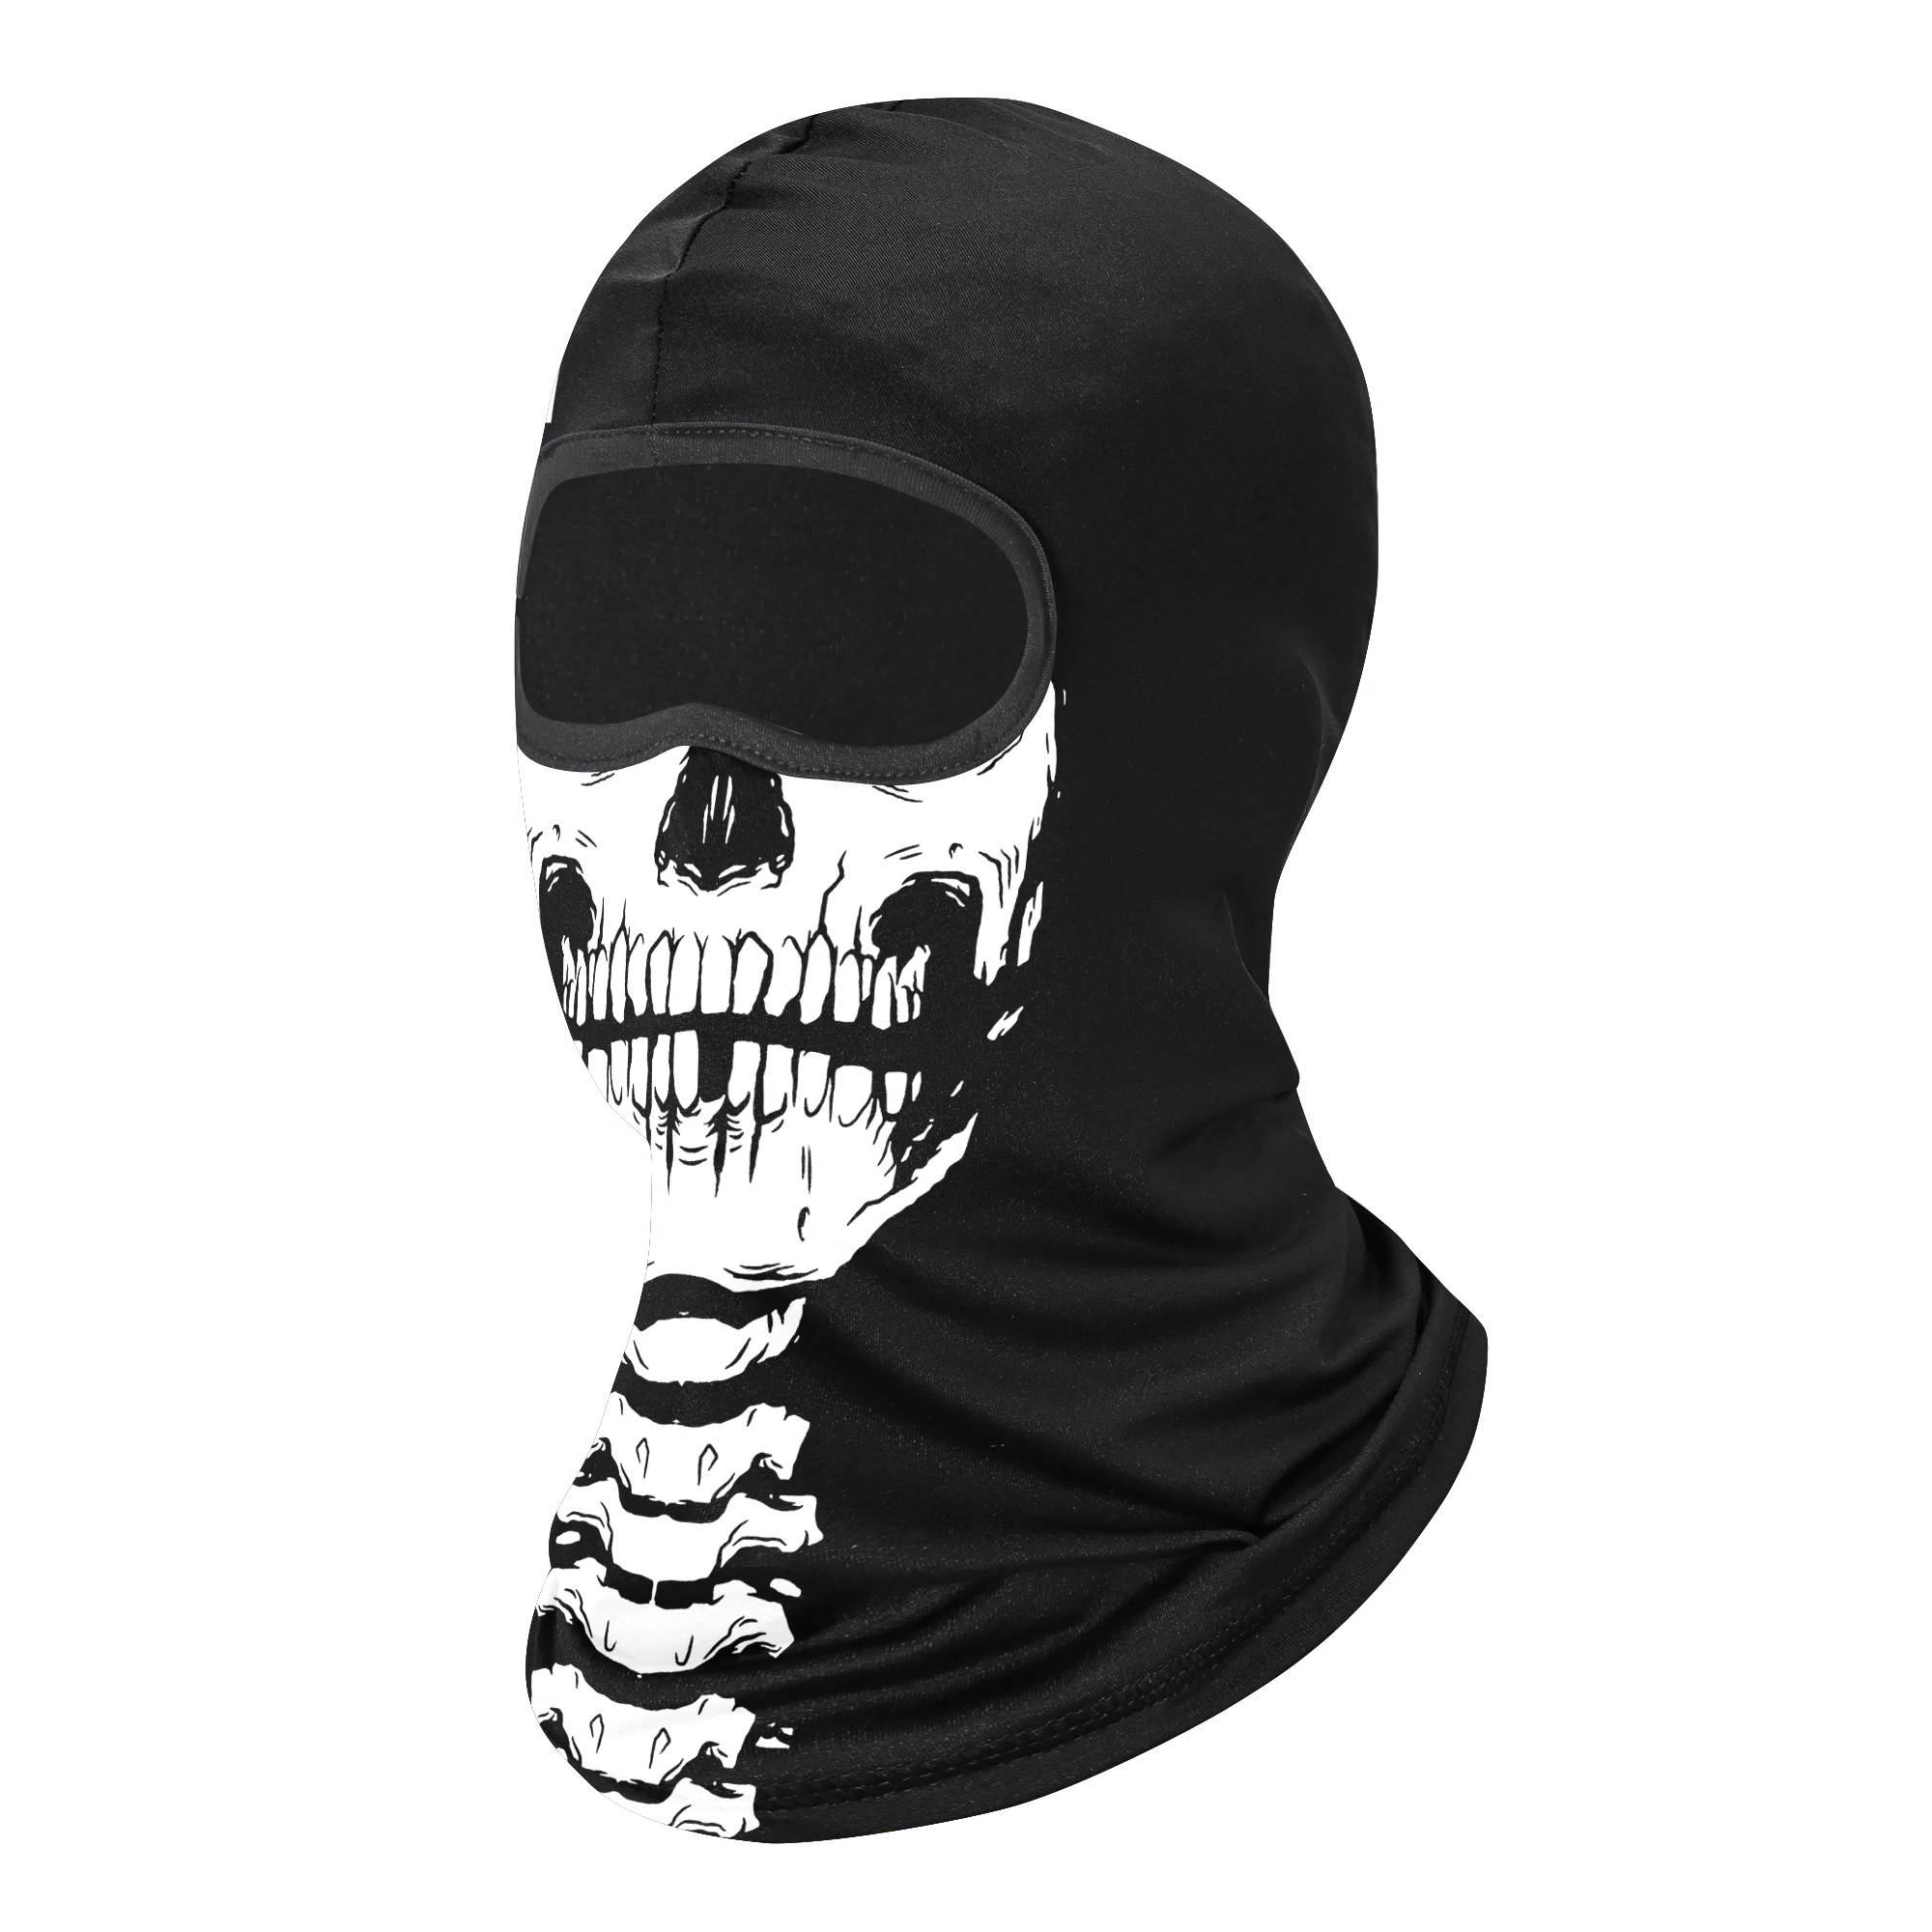 ski beanie Outdoor Sunscreen Balaclava Full Face Scarf Mask Tactical Military Motorcycle Wind Face Cover Cap Bicycle Cycling Headgear Men designer skully hat Skullies & Beanies